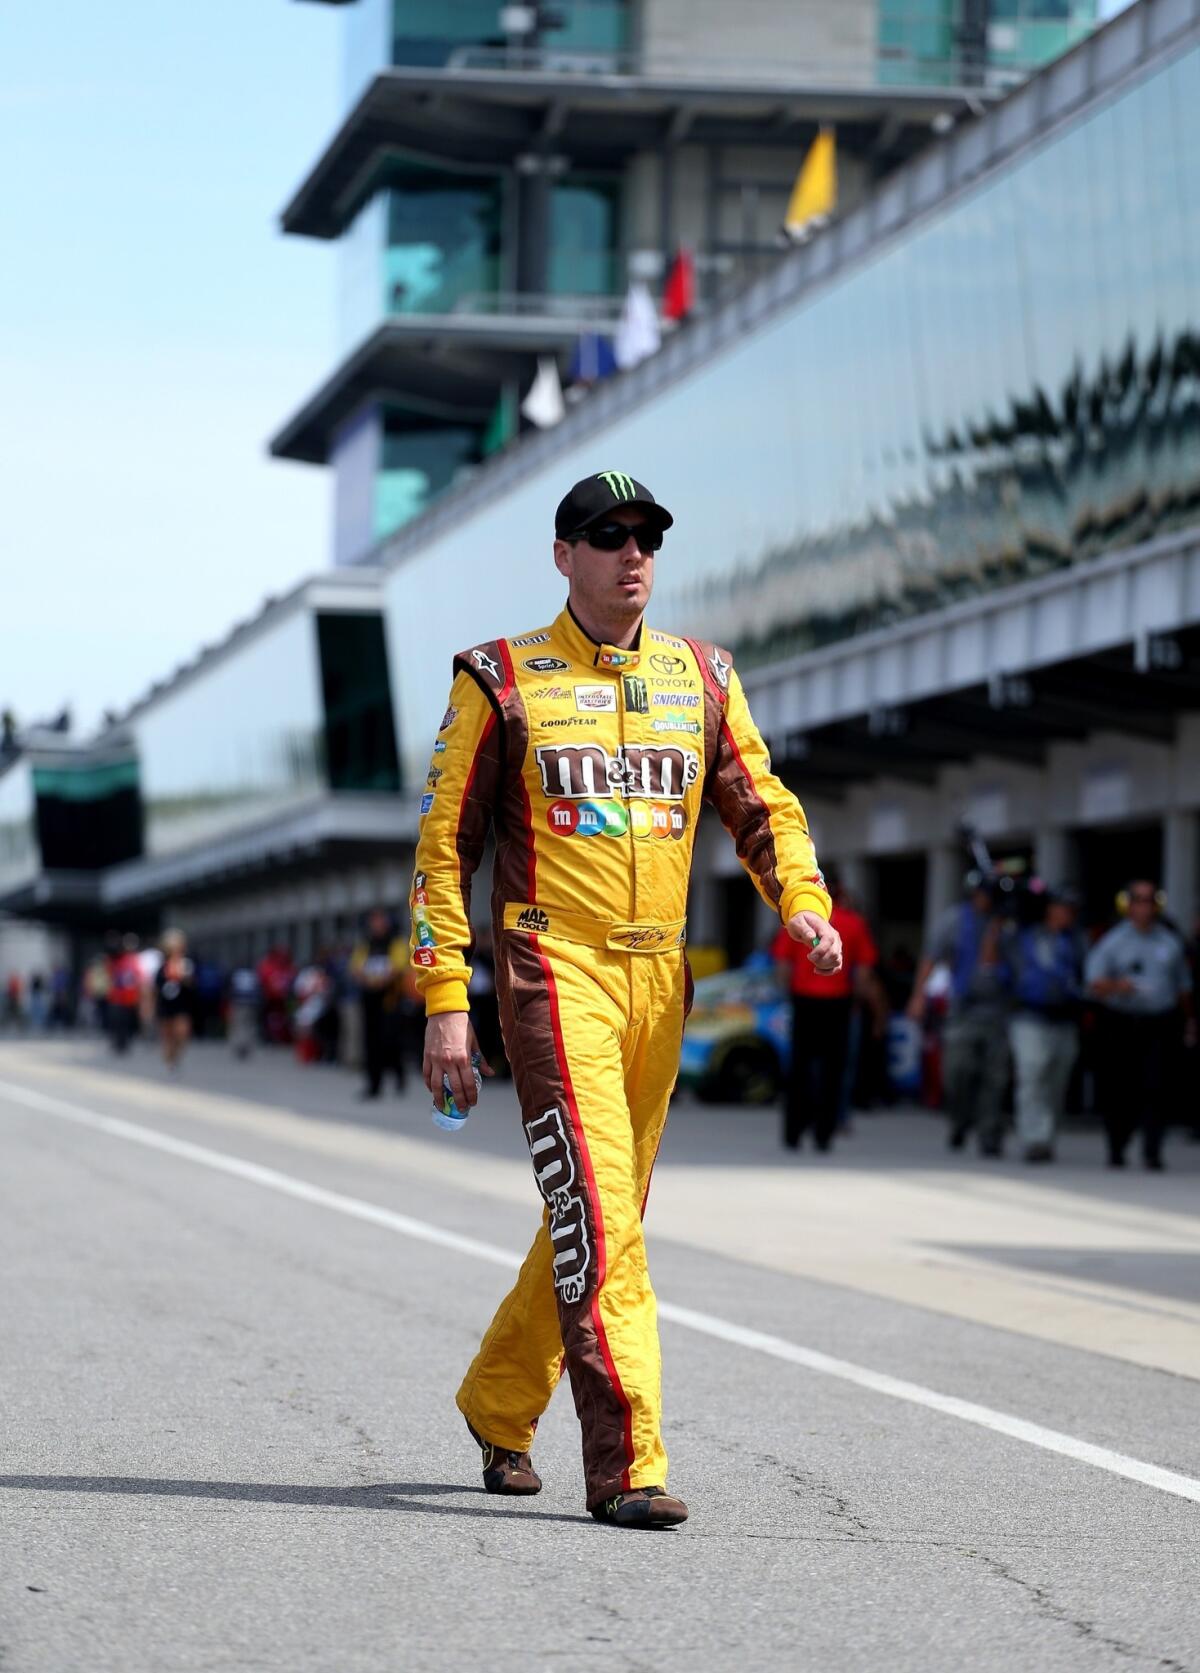 Will Kyle Busch finally live up to his potential as a future NASCAR Sprint Cup champion?